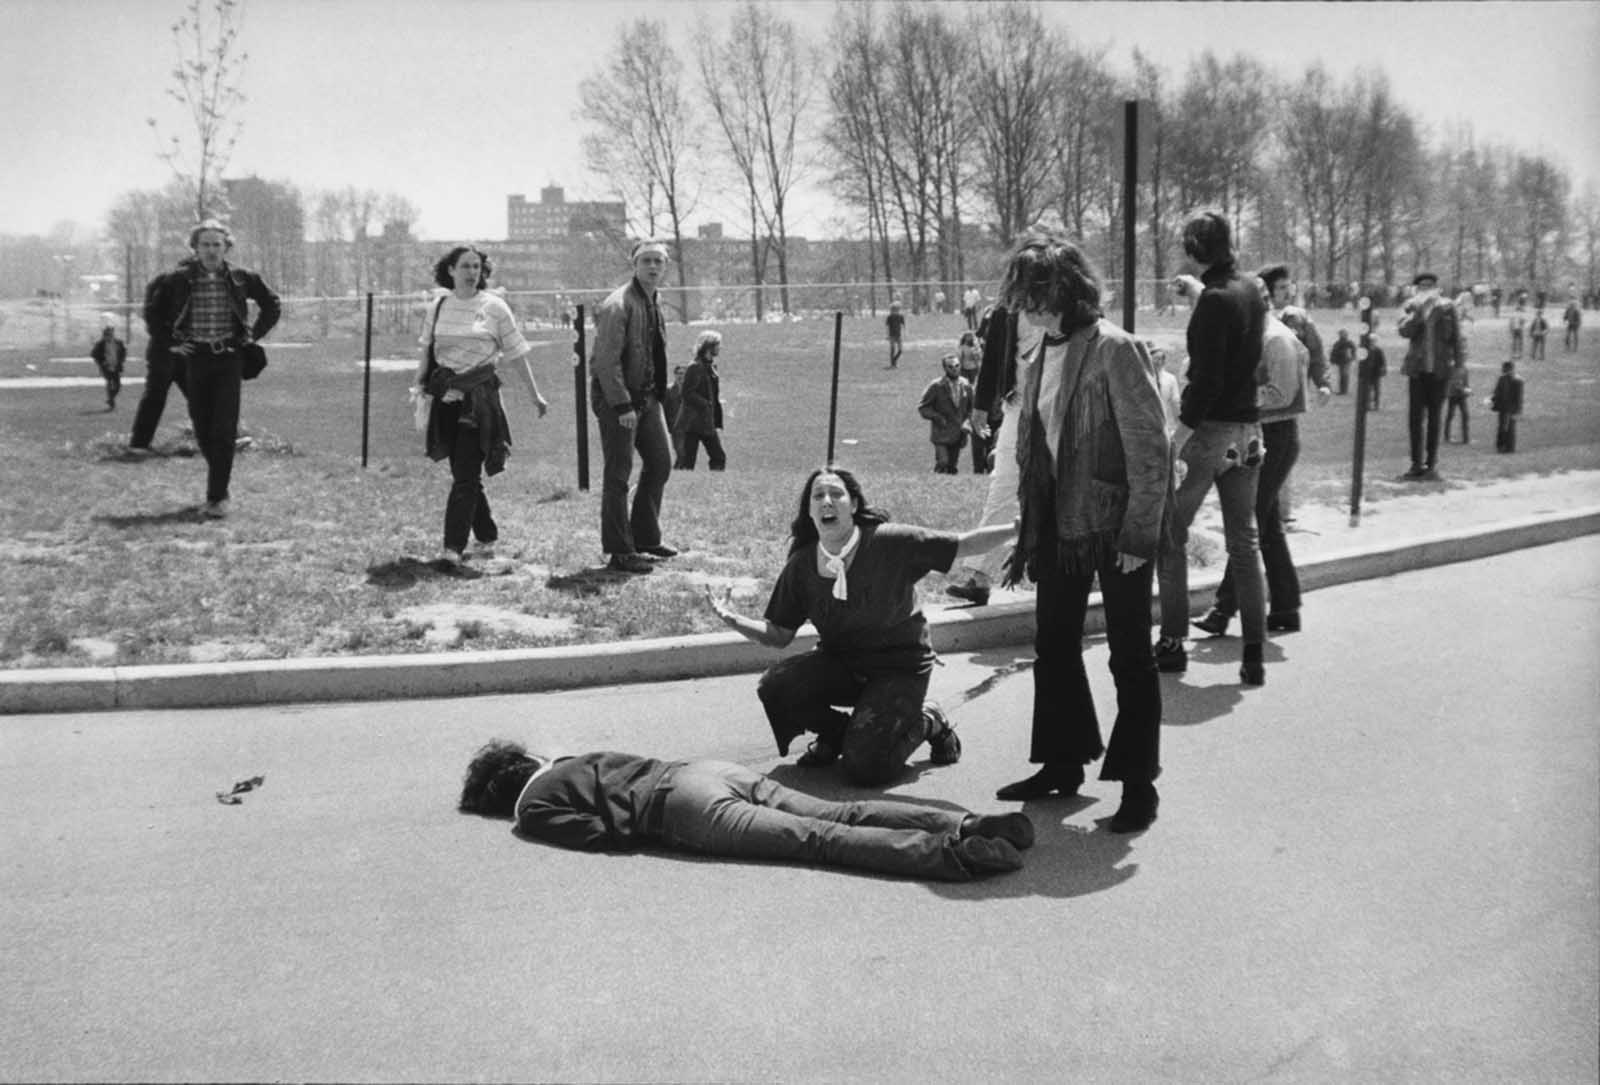 Fourteen-year-old Mary Ann Vecchio screams over the body of 20-year-old Kent State student Jeffrey Miller after he was shot by the Ohio National Guard during a protest against the U.S. invasion of Cambodia during the Vietnam War on May 4, 1970.